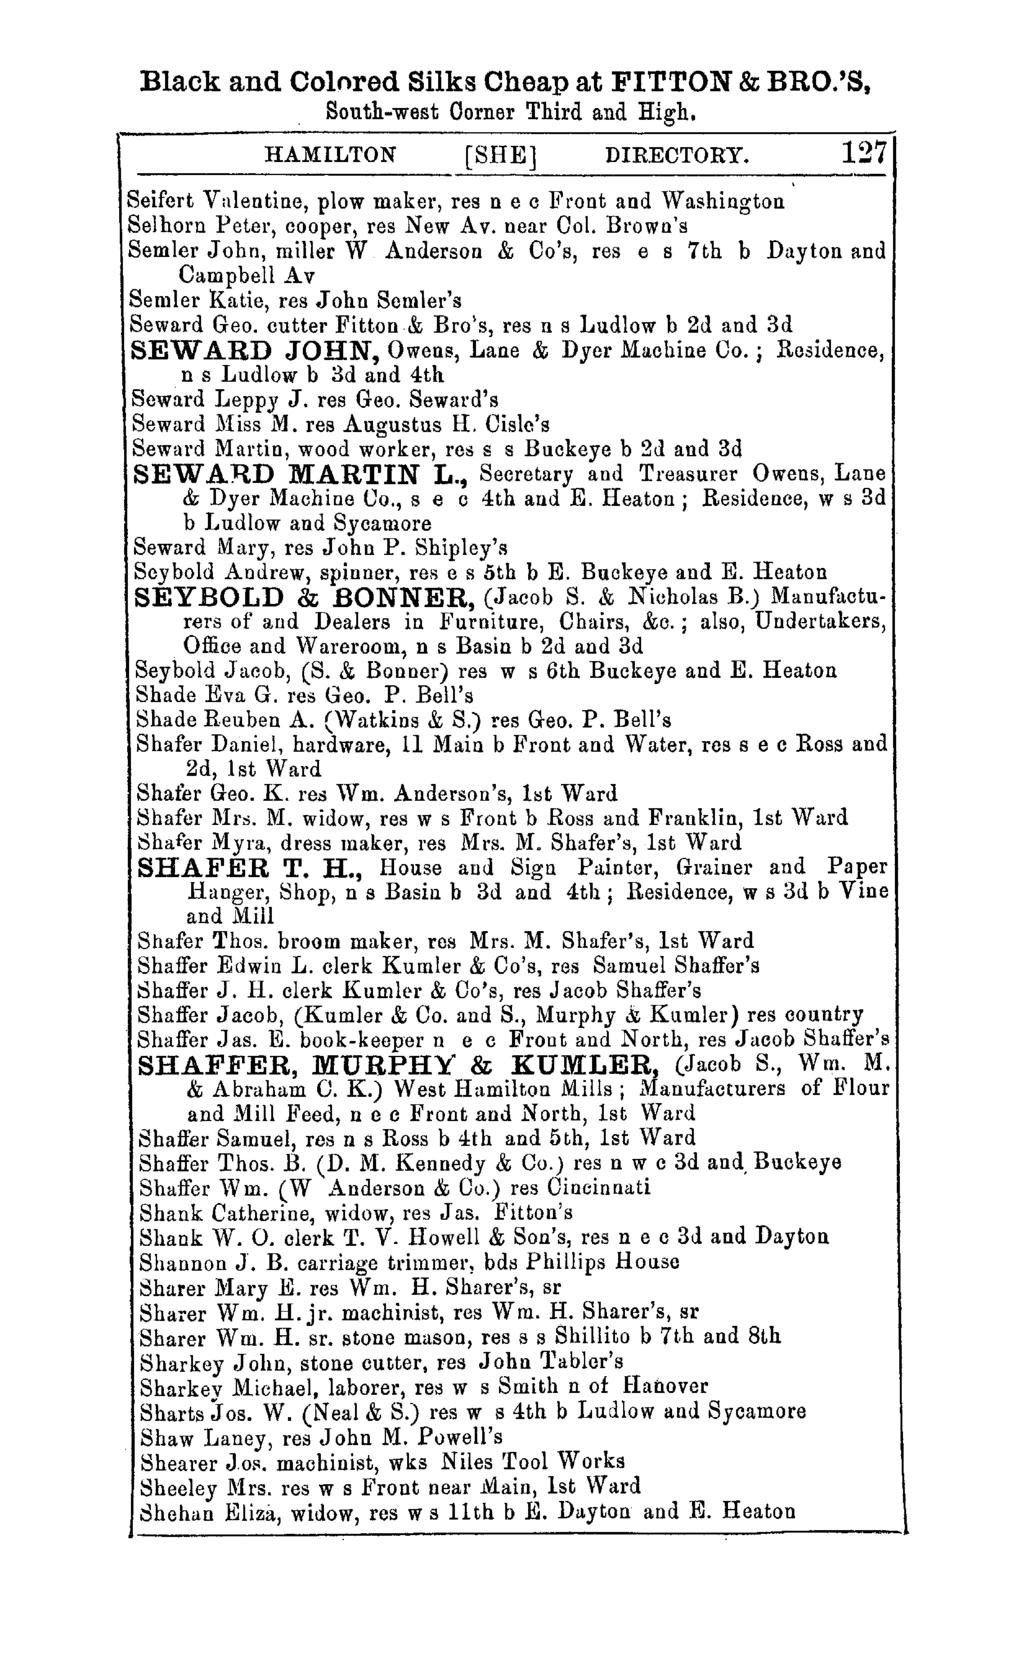 Black and Colnred Silks Cheap at FITTON & BRO.'S, South-west Oorner Third and High. HAMILTON [SHE] DIRECTORY.